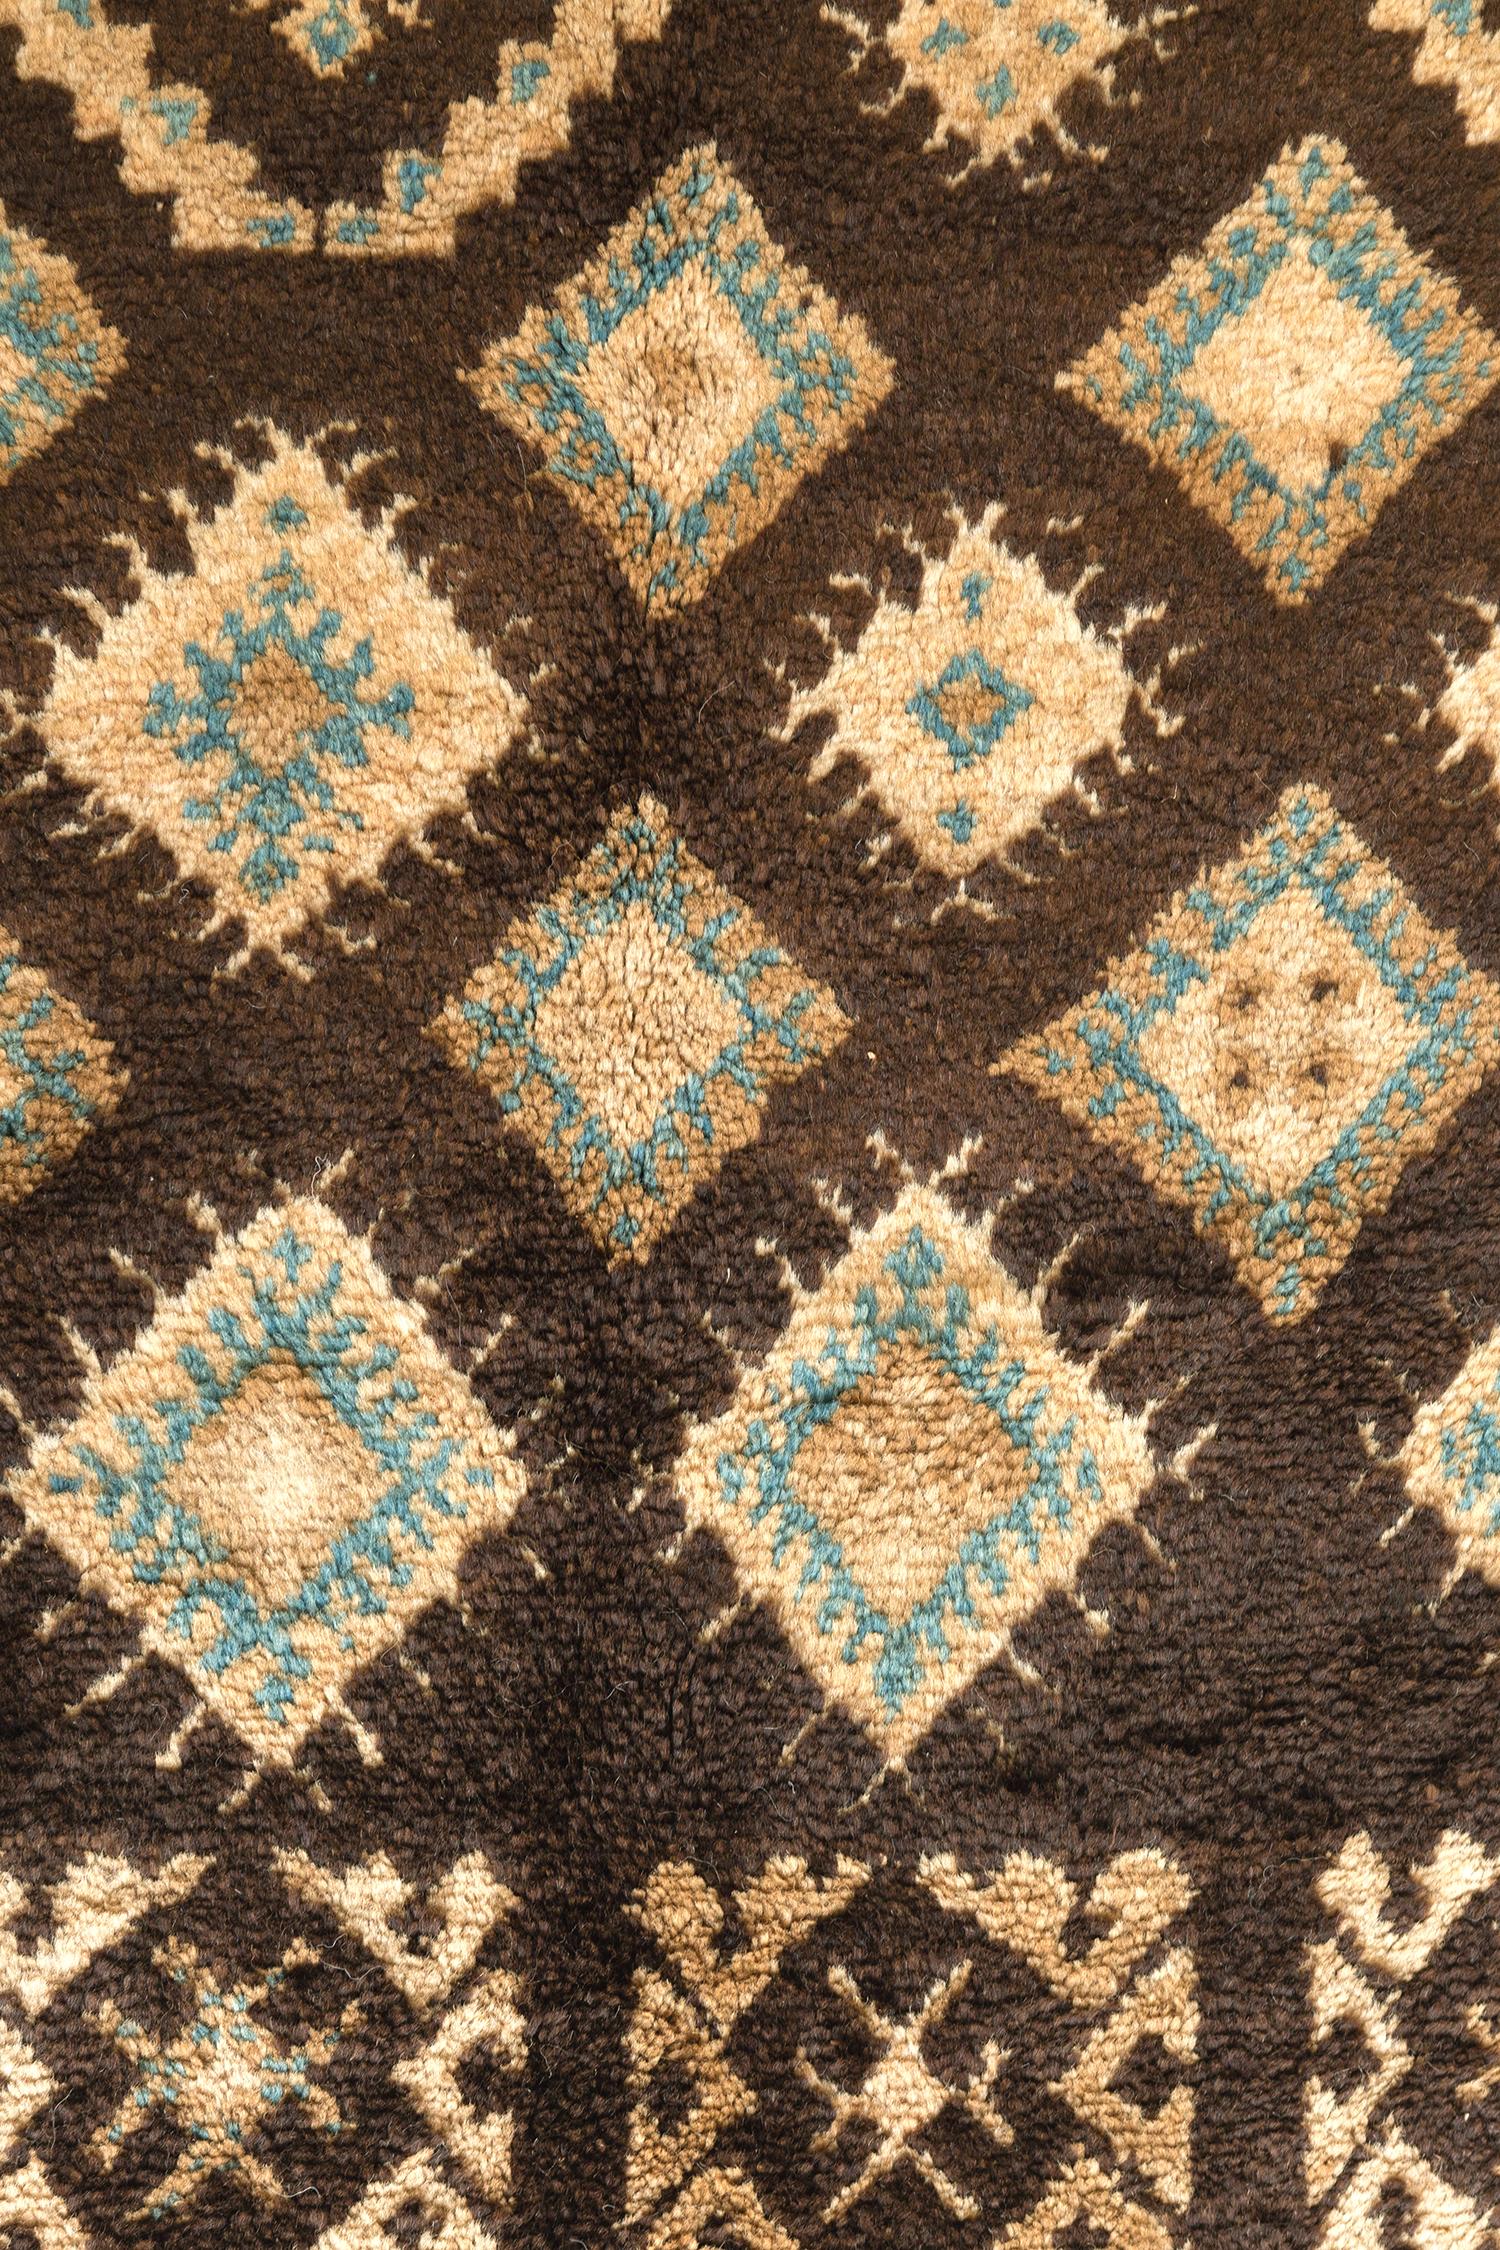 A majestic Vintage Moroccan High Atlas Tribe rug that features the stunning neutral tones of brown, ivory, camel and dusty blue. Embodying the fascinating all-over variations of symbolic lozenge panels, this masterful rug is enclosed with a border